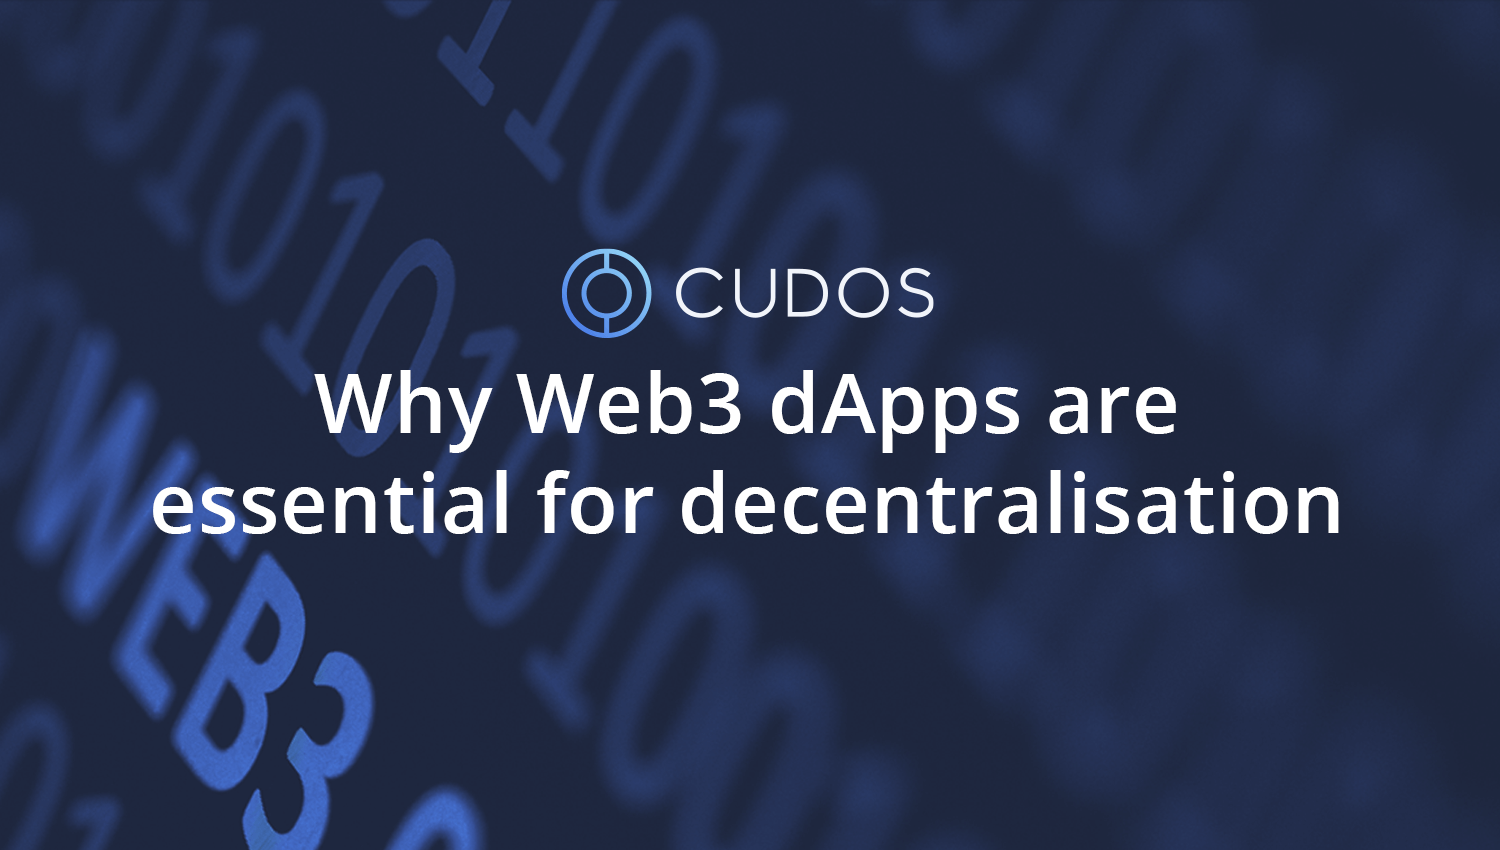 What are dApps? Why are they essential for decentralisation?